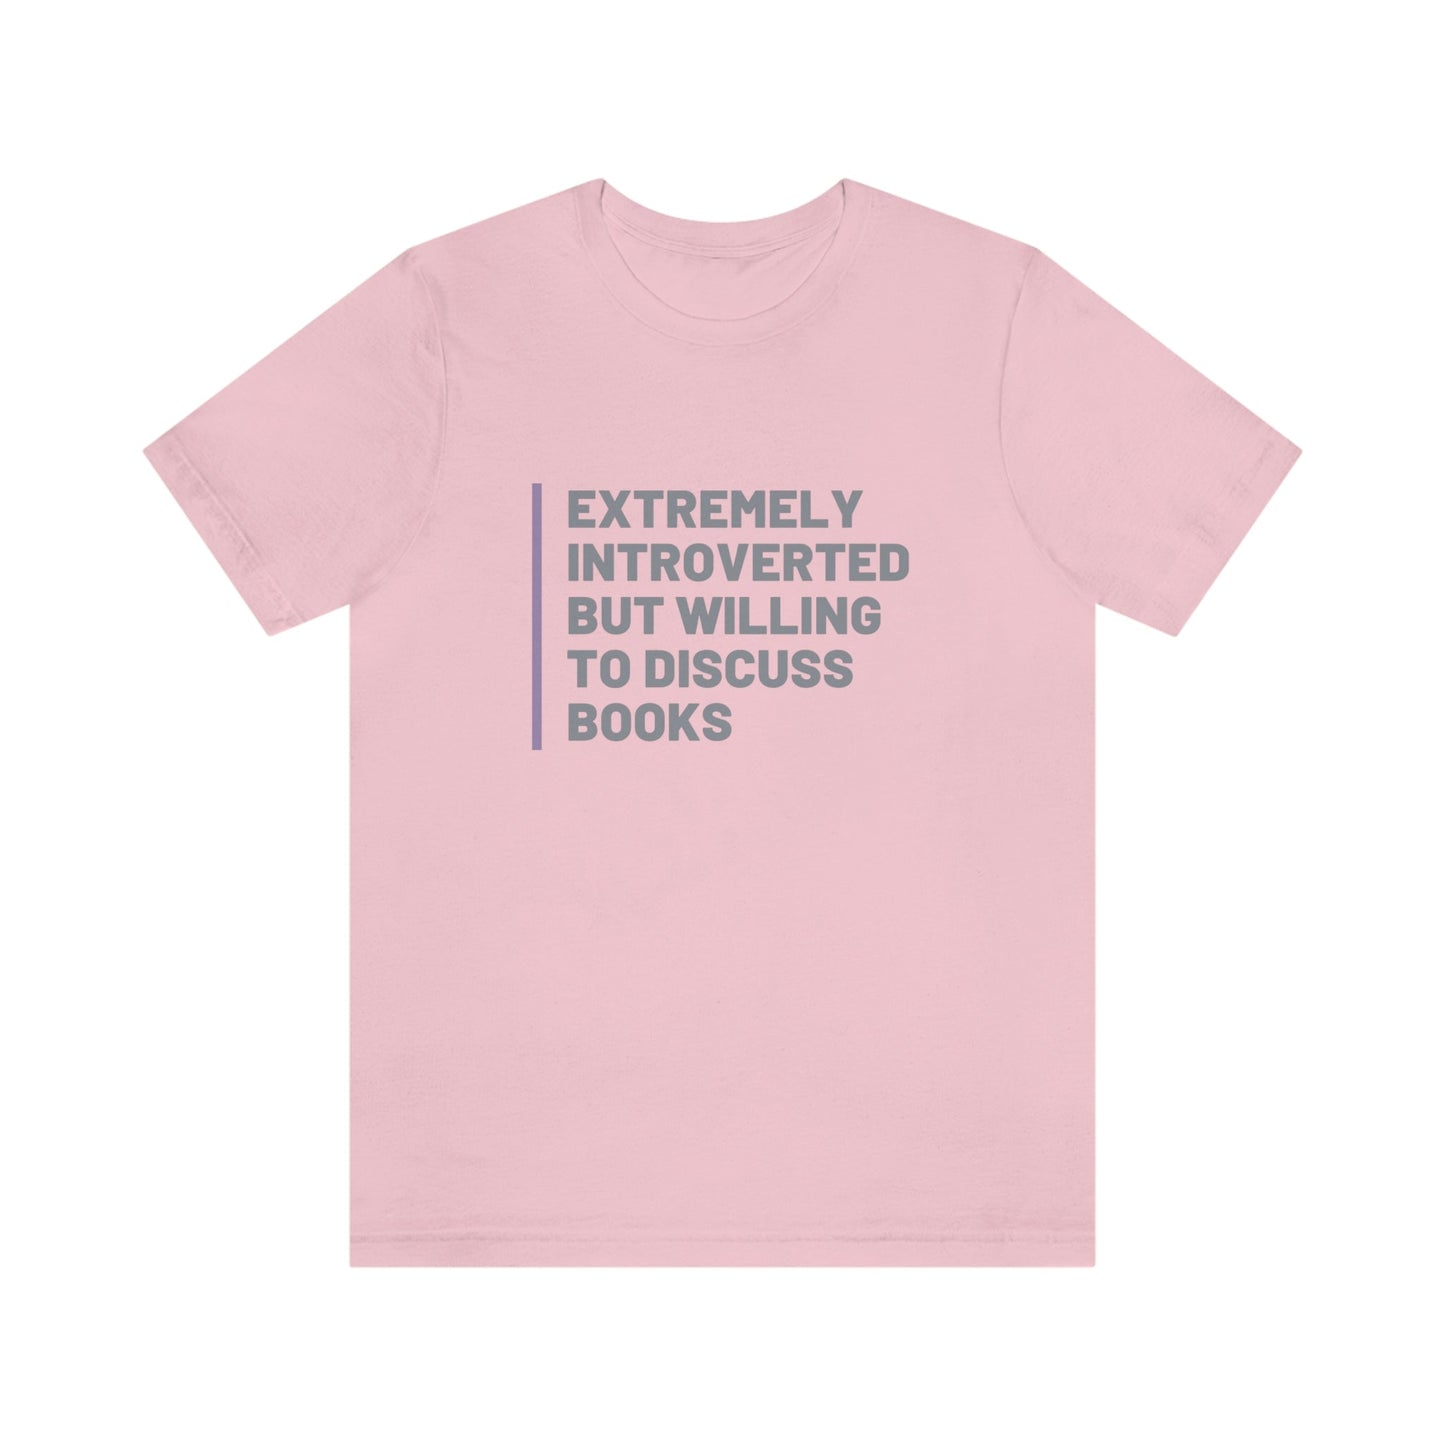 Introverted But Willing to Discuss Books Shirt